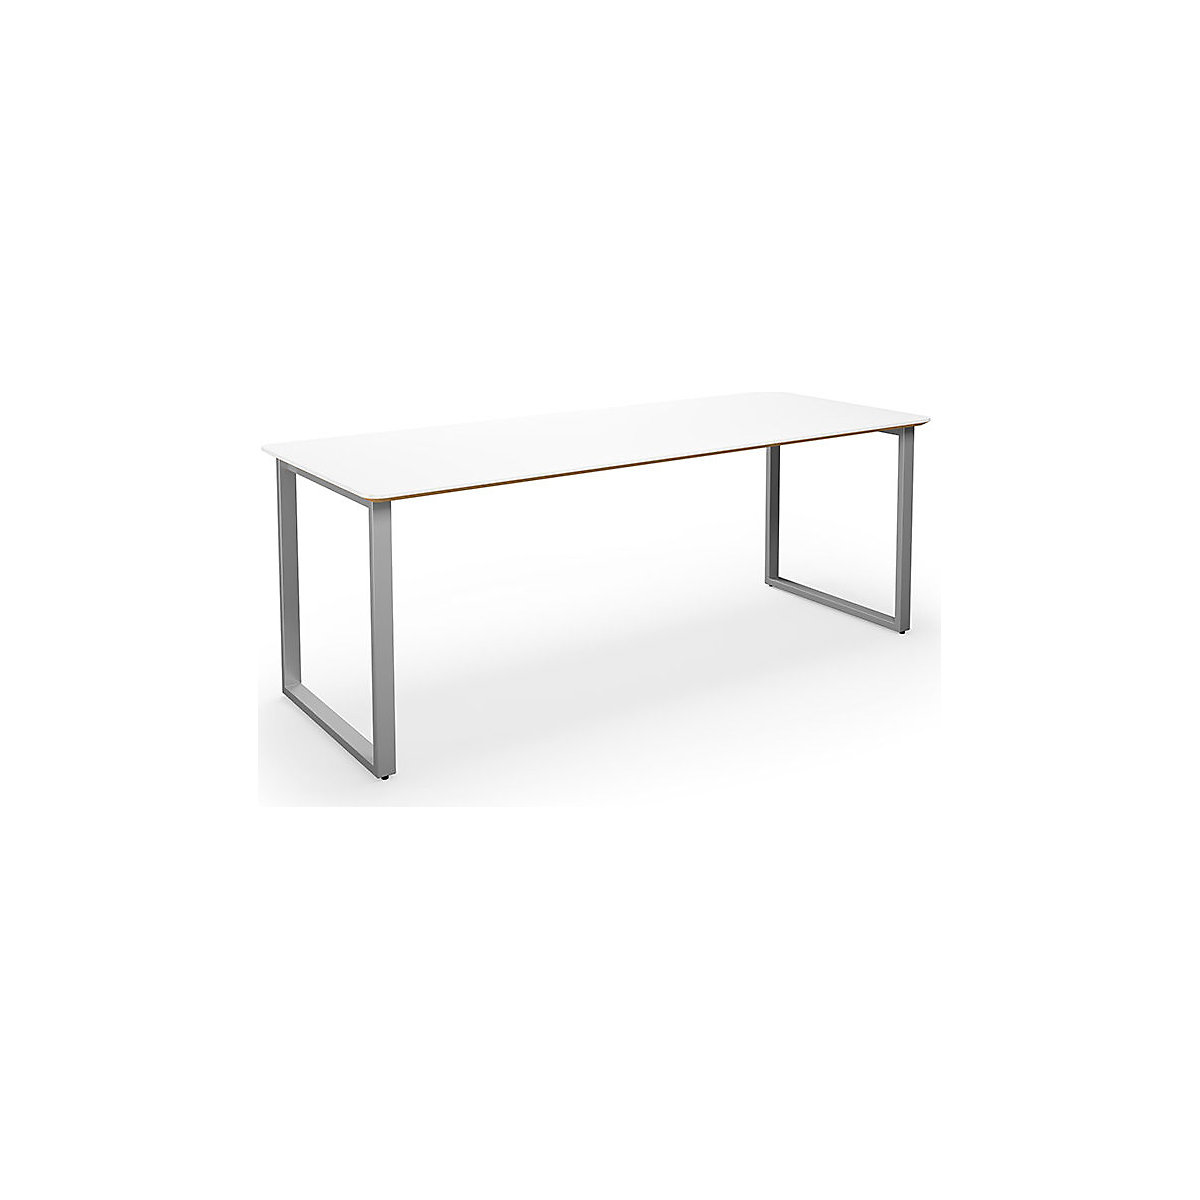 DUO-O Trend multi-purpose desk, straight tabletop, rounded corners, WxD 1800 x 800 mm, white, silver-4